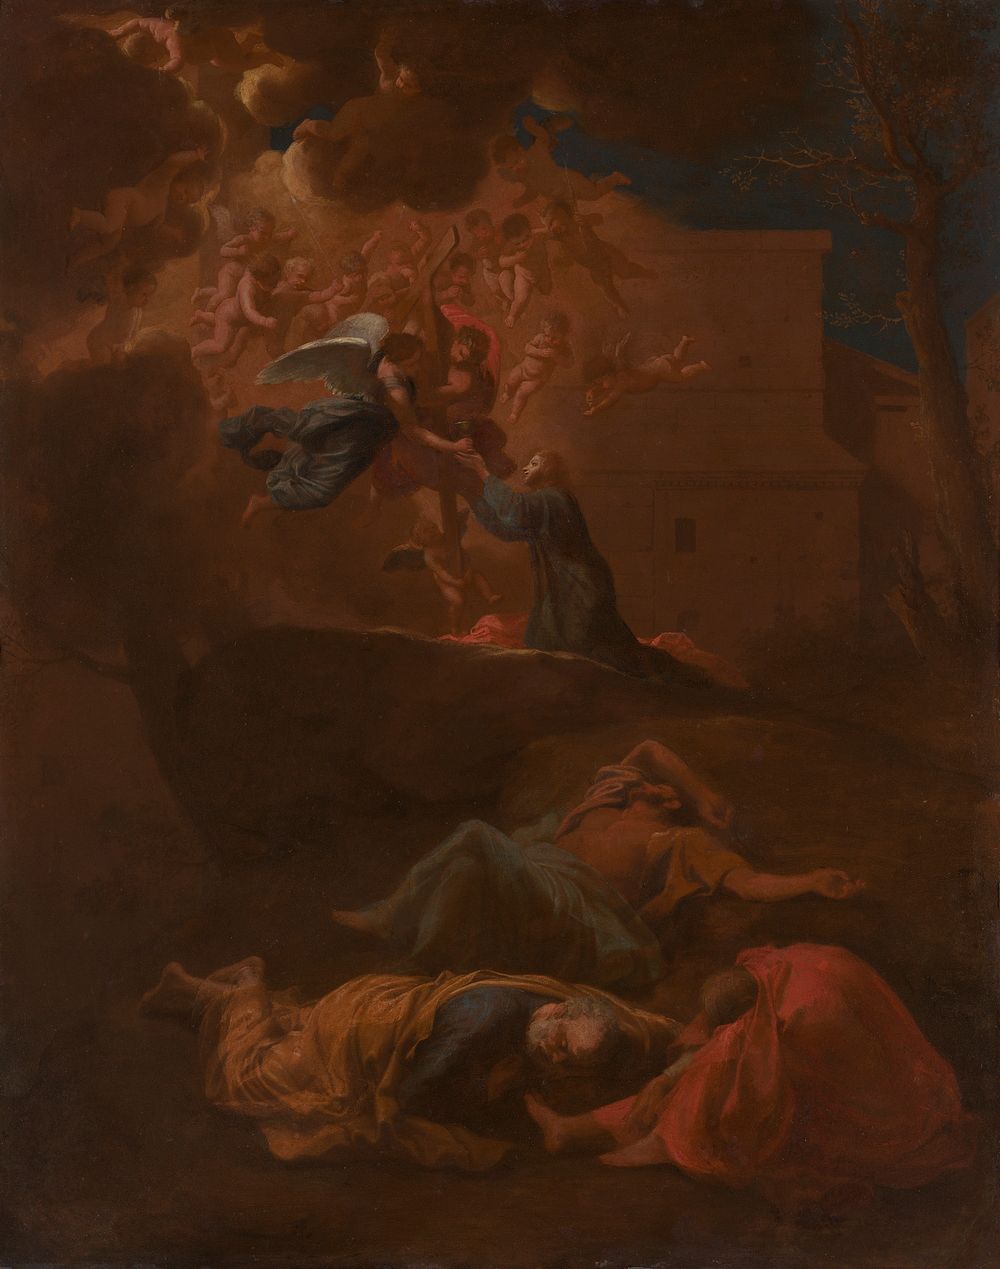 The Agony in the Garden by Nicolas Poussin